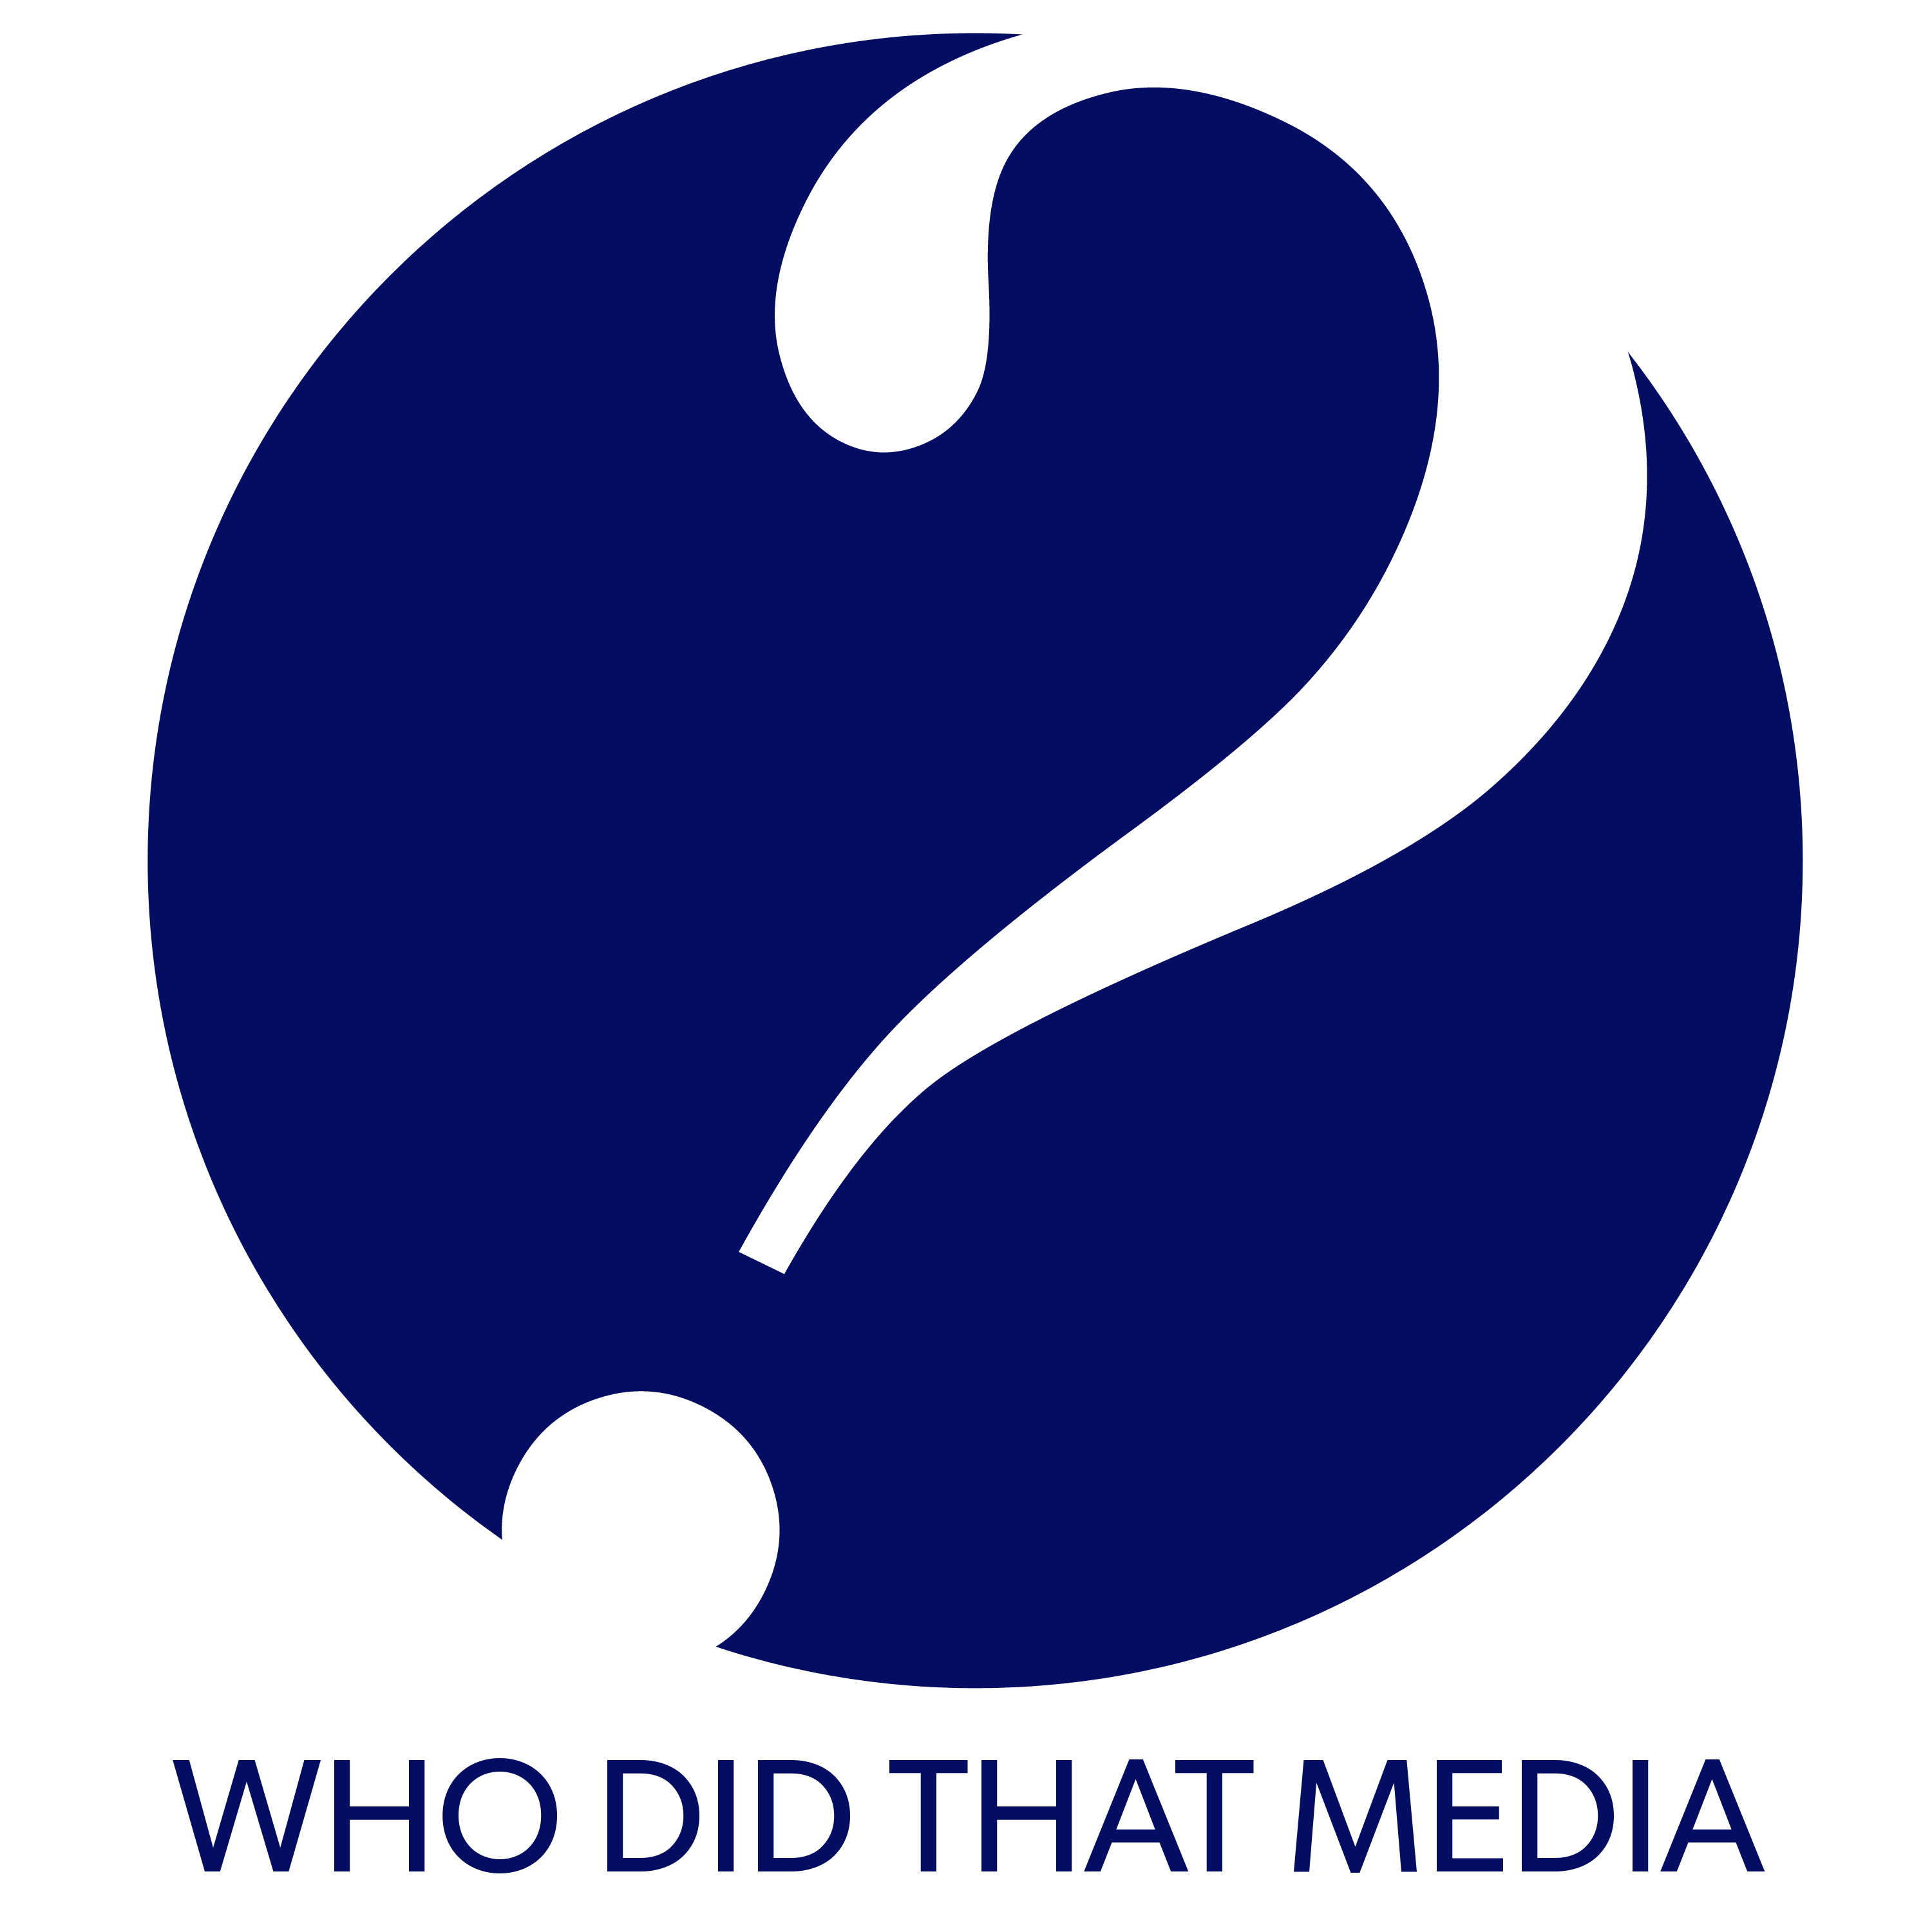 Who Did That Media?